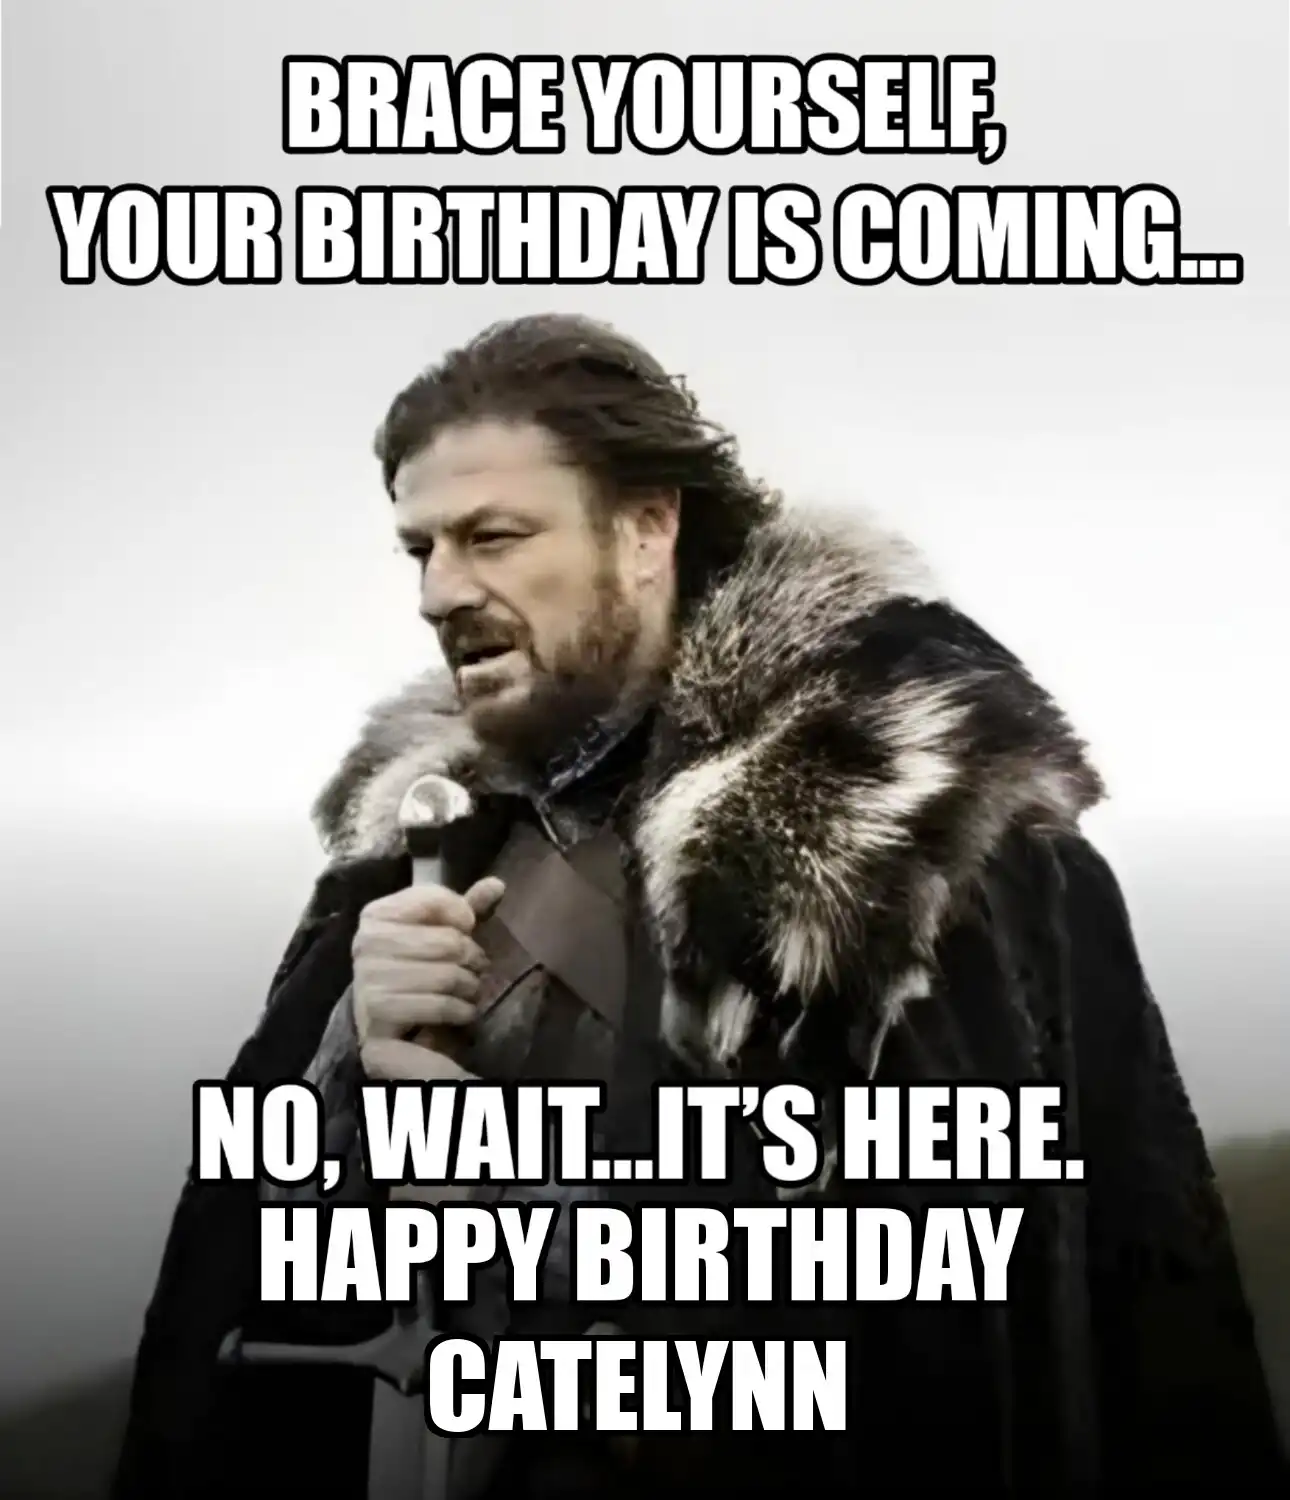 Happy Birthday Catelynn Brace Yourself Your Birthday Is Coming Meme